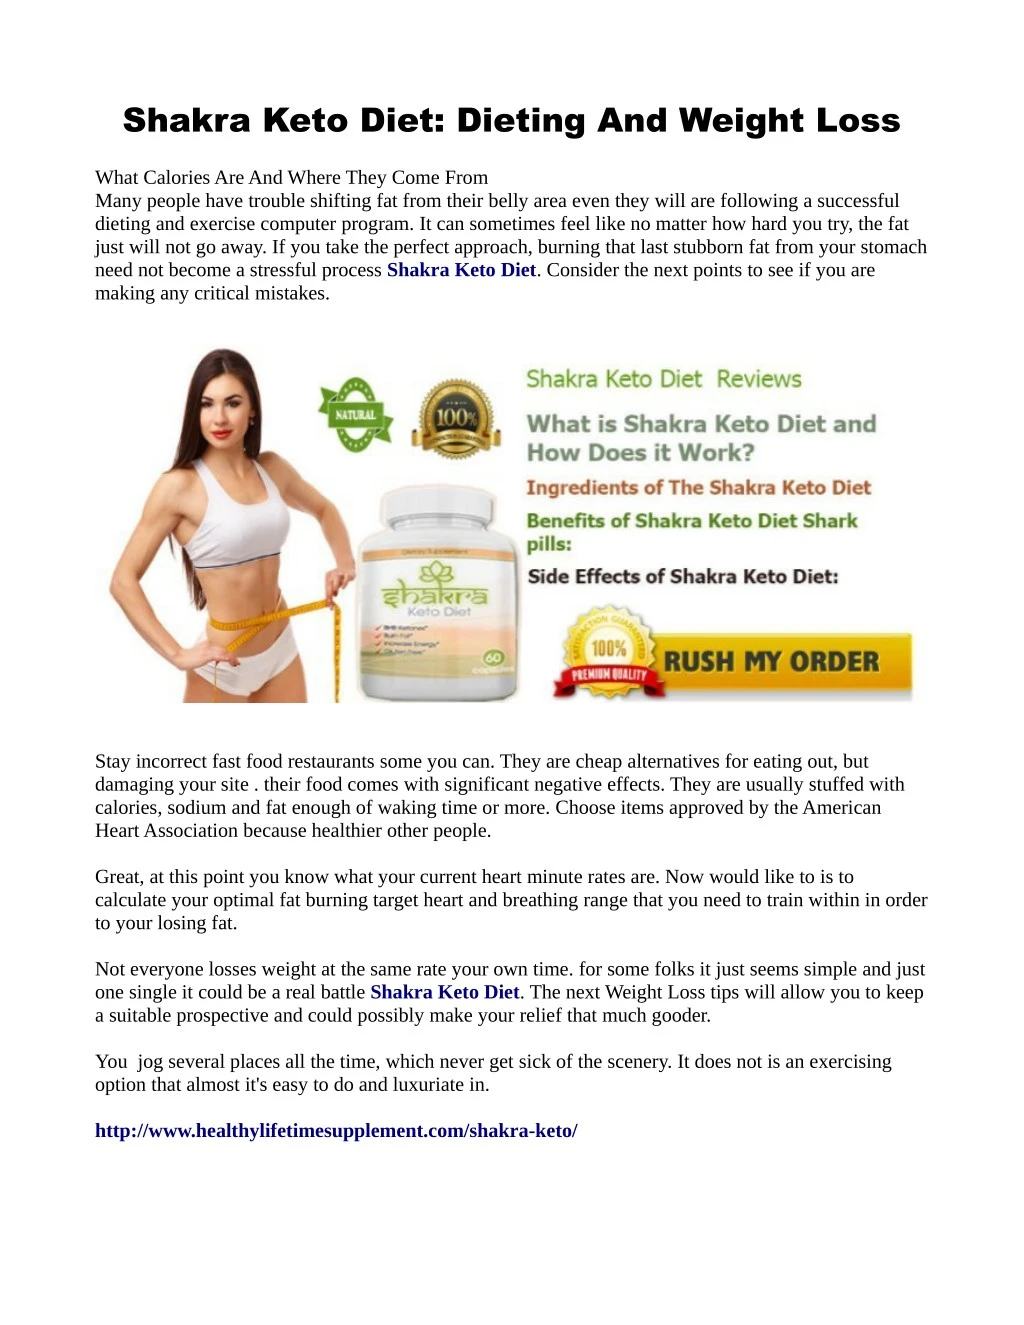 shakra keto diet dieting and weight loss